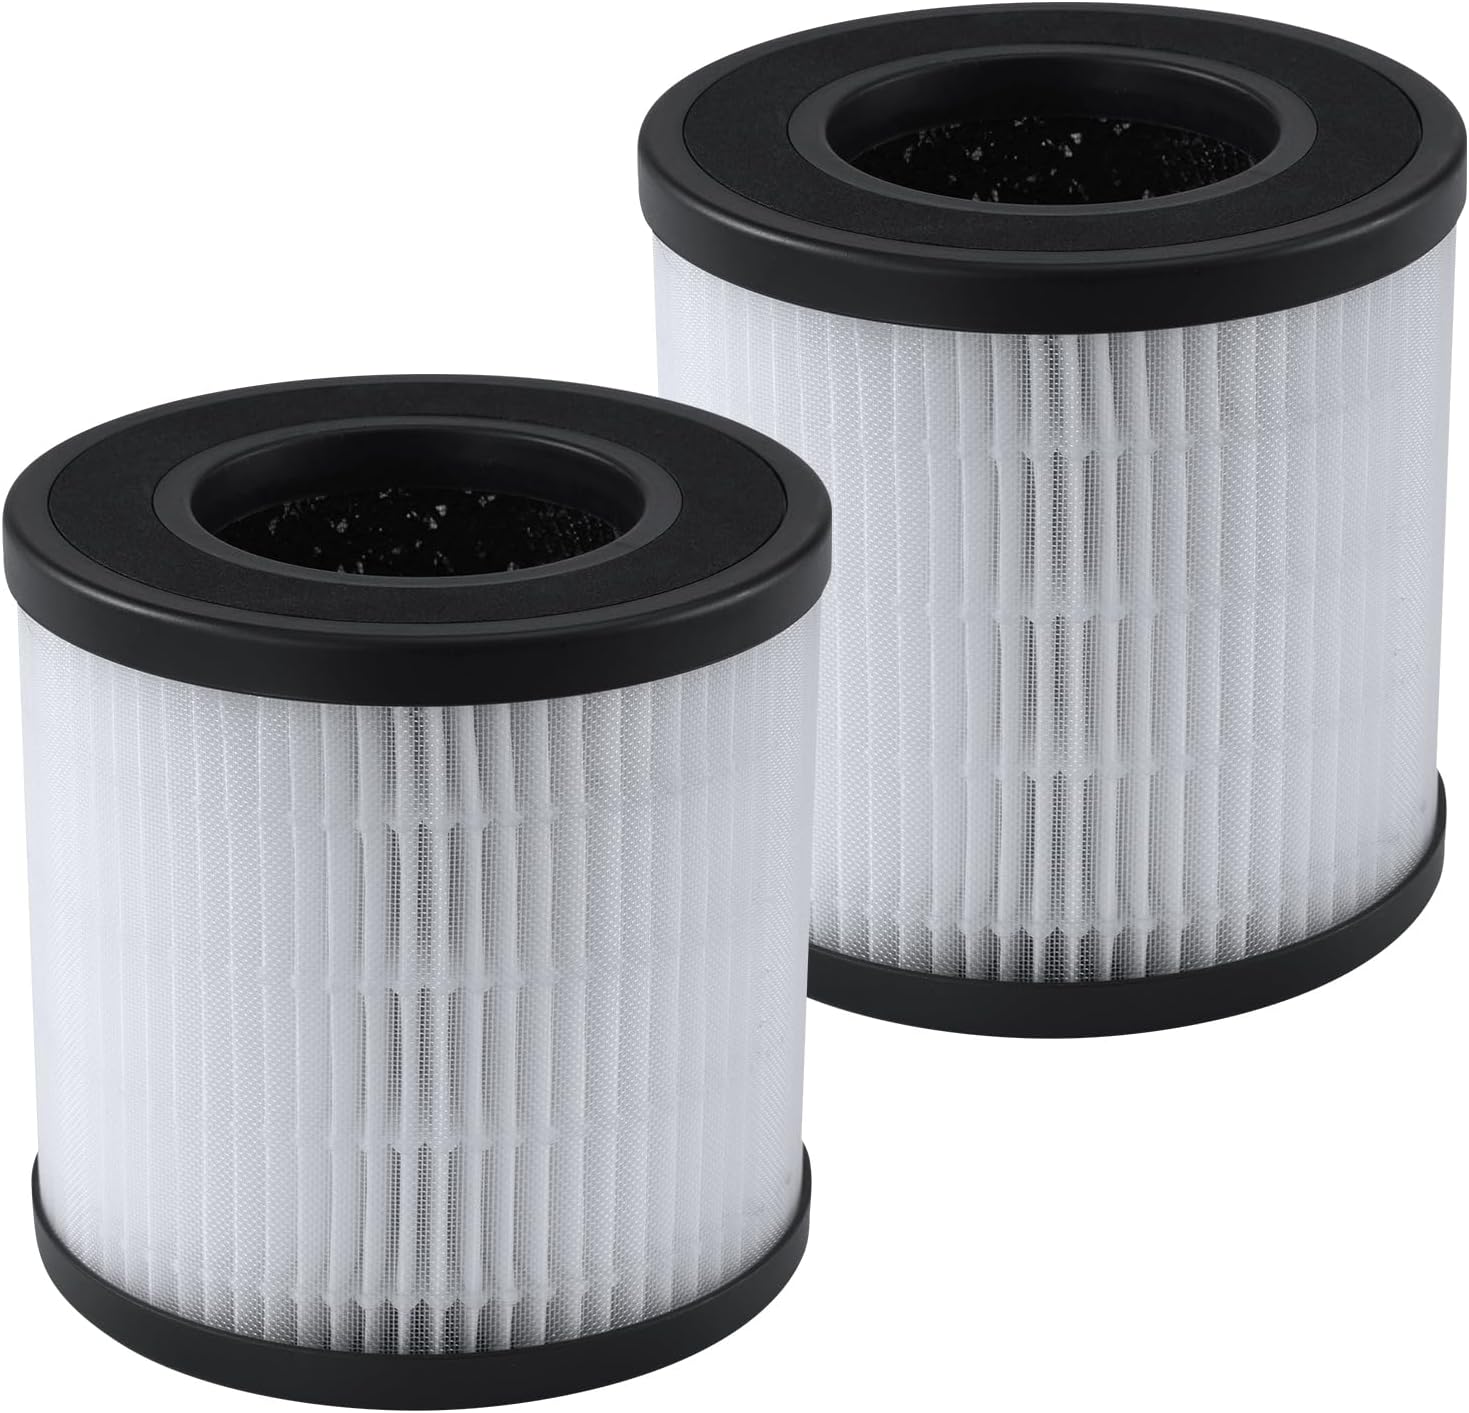 PU-P05 Air Purifier Replacement (2 Pack) Quiet Air Cleaner Filtering Out 99.97% 0.01 Microns, Smoke, Pollen, Particles